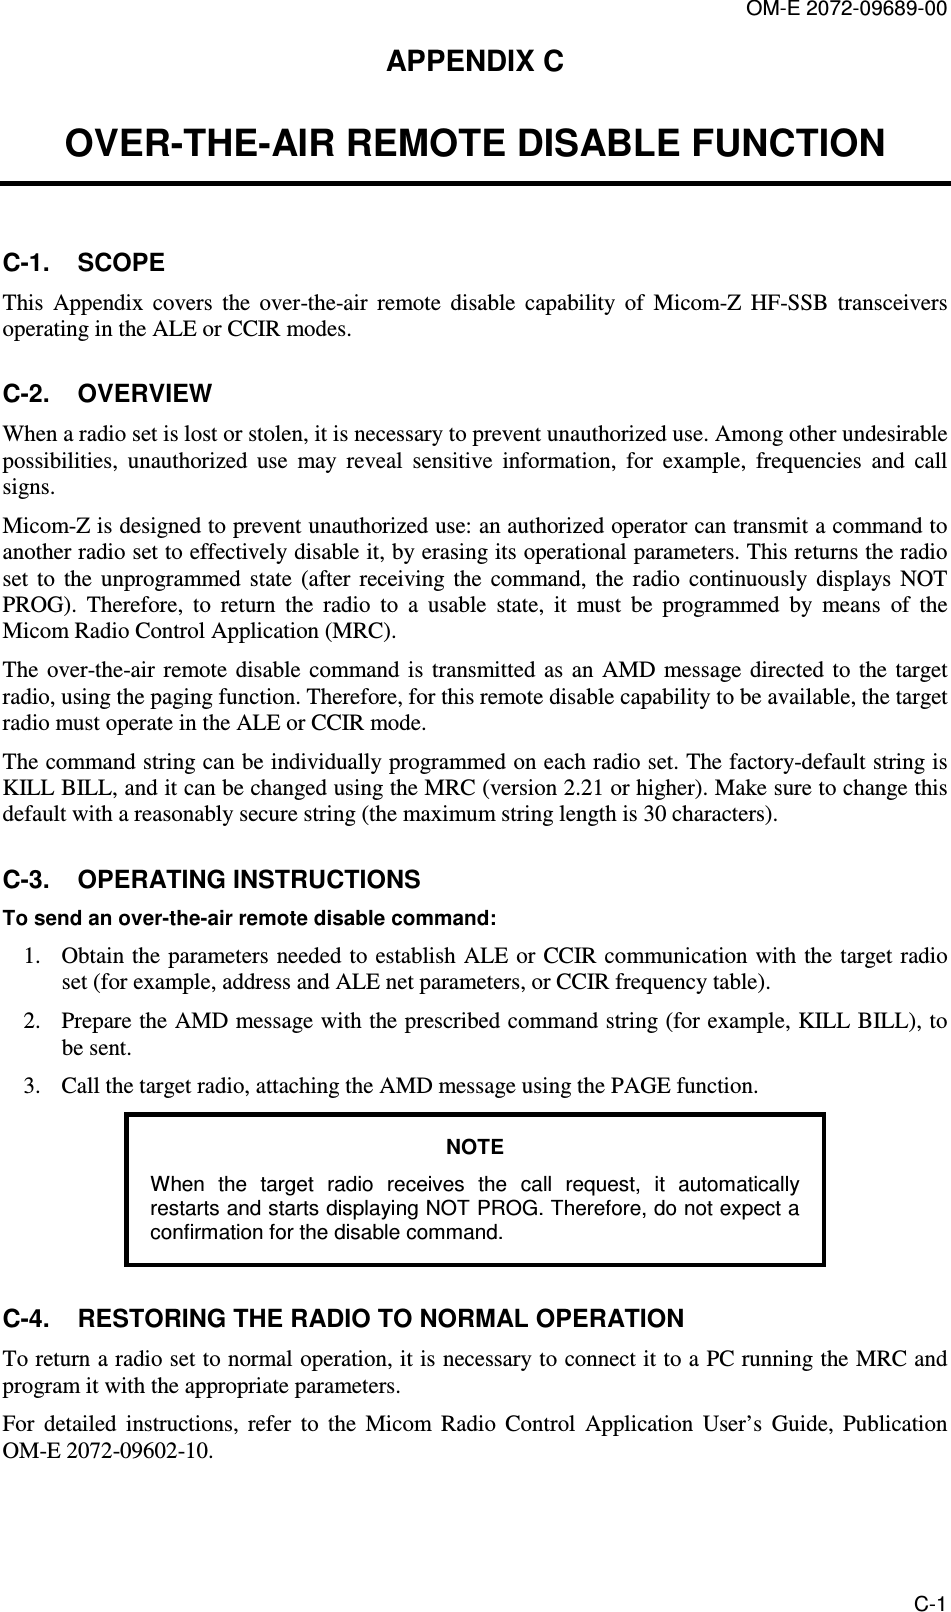 OM-E 2072-09689-00 C-1 APPENDIX C  OVER-THE-AIR REMOTE DISABLE FUNCTION C-1.  SCOPE This  Appendix  covers  the  over-the-air  remote  disable  capability  of  Micom-Z  HF-SSB  transceivers operating in the ALE or CCIR modes. C-2.  OVERVIEW When a radio set is lost or stolen, it is necessary to prevent unauthorized use. Among other undesirable possibilities,  unauthorized  use  may  reveal  sensitive  information,  for  example,  frequencies  and  call signs.  Micom-Z is designed to prevent unauthorized use: an authorized operator can transmit a command to another radio set to effectively disable it, by erasing its operational parameters. This returns the radio set  to  the  unprogrammed  state  (after  receiving  the  command,  the  radio  continuously  displays  NOT PROG).  Therefore,  to  return  the  radio  to  a  usable  state,  it  must  be  programmed  by  means  of  the Micom Radio Control Application (MRC). The  over-the-air  remote  disable  command  is  transmitted  as  an  AMD  message directed to the target radio, using the paging function. Therefore, for this remote disable capability to be available, the target radio must operate in the ALE or CCIR mode. The command string can be individually programmed on each radio set. The factory-default string is KILL BILL, and it can be changed using the MRC (version 2.21 or higher). Make sure to change this default with a reasonably secure string (the maximum string length is 30 characters). C-3.  OPERATING INSTRUCTIONS  To send an over-the-air remote disable command: 1. Obtain the  parameters needed to establish ALE or CCIR communication with the target radio set (for example, address and ALE net parameters, or CCIR frequency table). 2. Prepare the AMD message with the prescribed command string (for example, KILL BILL), to be sent. 3. Call the target radio, attaching the AMD message using the PAGE function. NOTE When  the  target  radio  receives  the  call  request,  it  automatically restarts and starts displaying NOT PROG. Therefore, do not expect a confirmation for the disable command. C-4.  RESTORING THE RADIO TO NORMAL OPERATION  To return a radio set to normal operation, it is necessary to connect it to a PC running the MRC and program it with the appropriate parameters.  For  detailed  instructions,  refer  to  the  Micom  Radio  Control  Application  User’s  Guide,  Publication OM-E 2072-09602-10. 